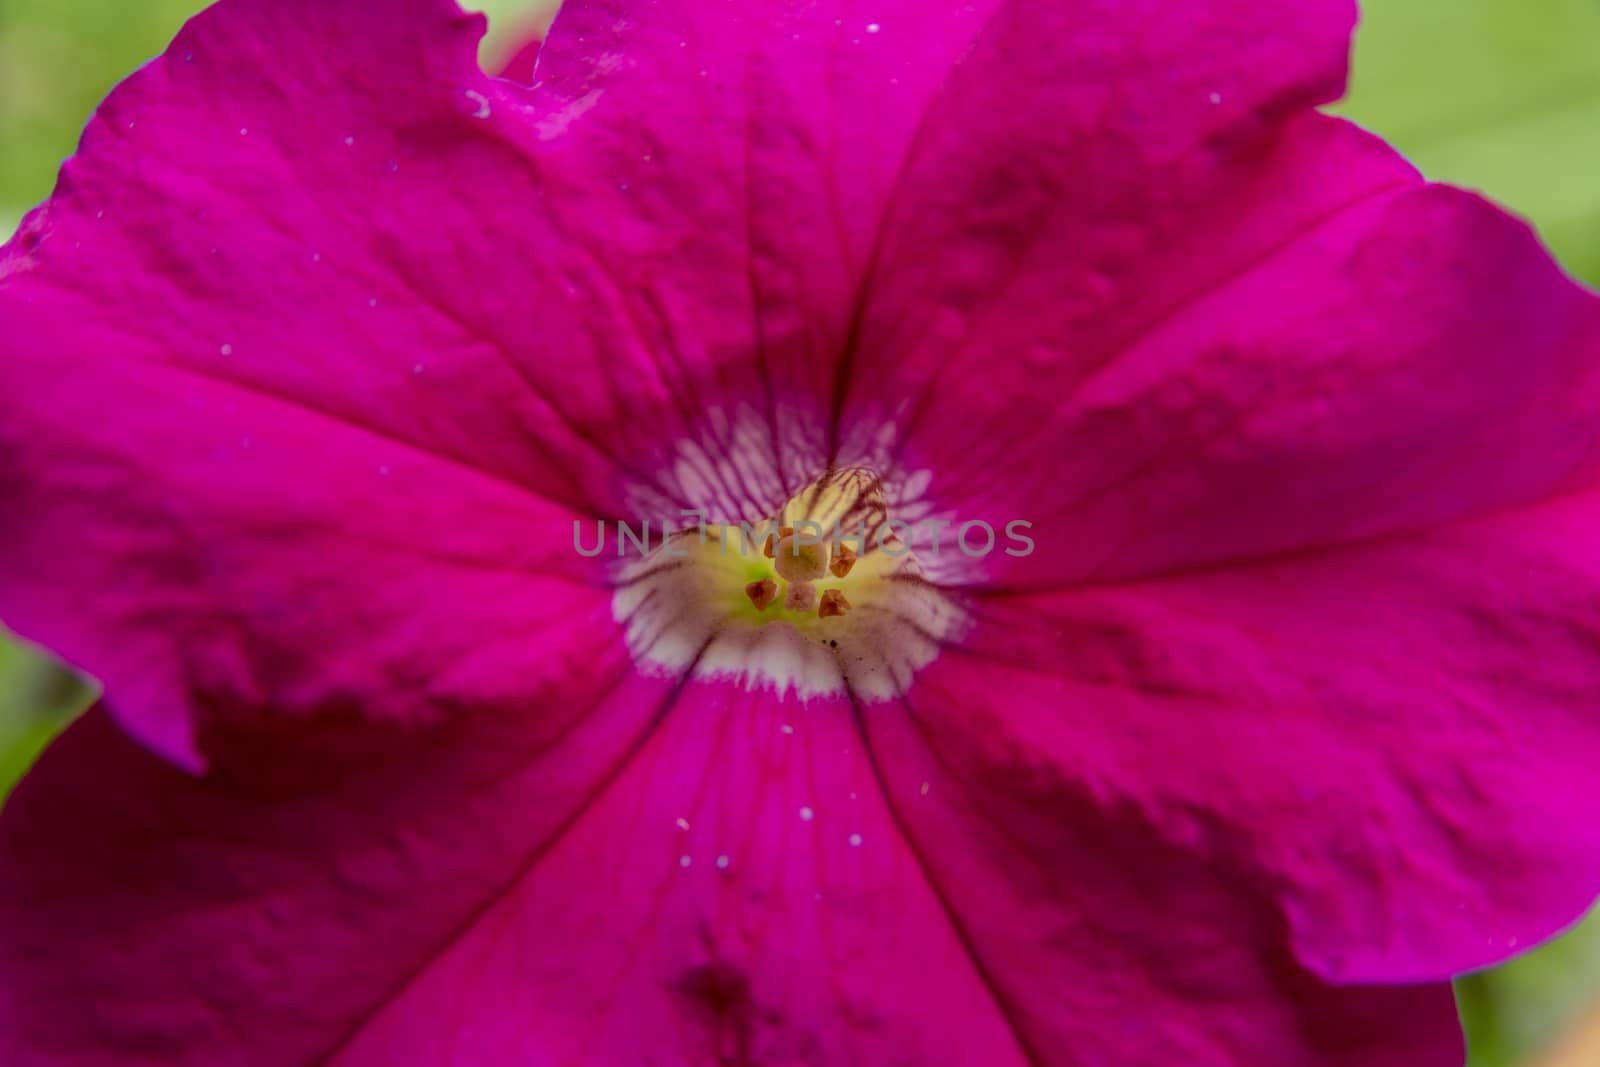 Closeup of pink Petunia flower with Stigma pistillum and Anther androecium by kb79